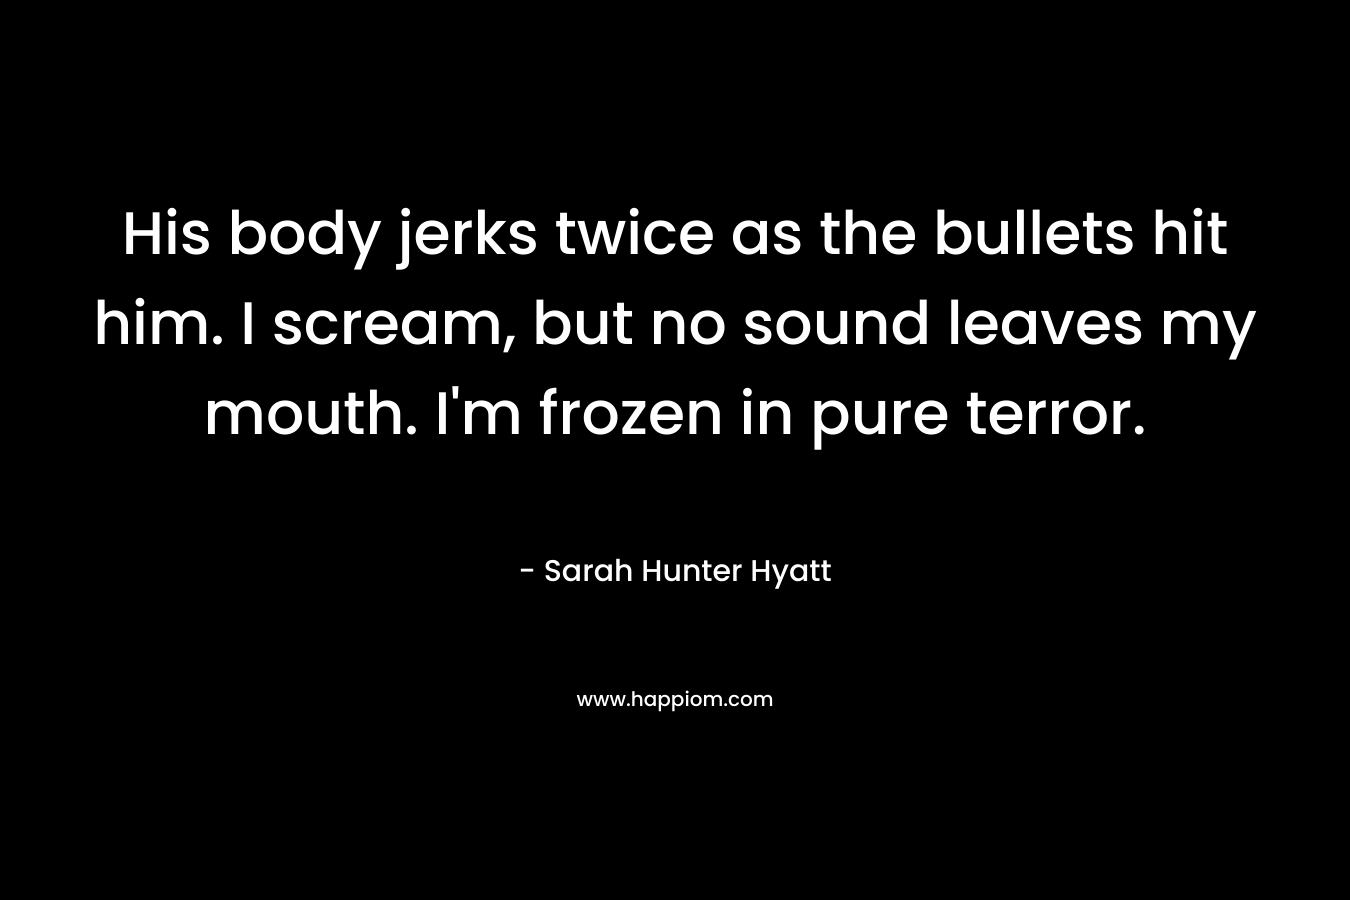 His body jerks twice as the bullets hit him. I scream, but no sound leaves my mouth. I’m frozen in pure terror. – Sarah Hunter Hyatt